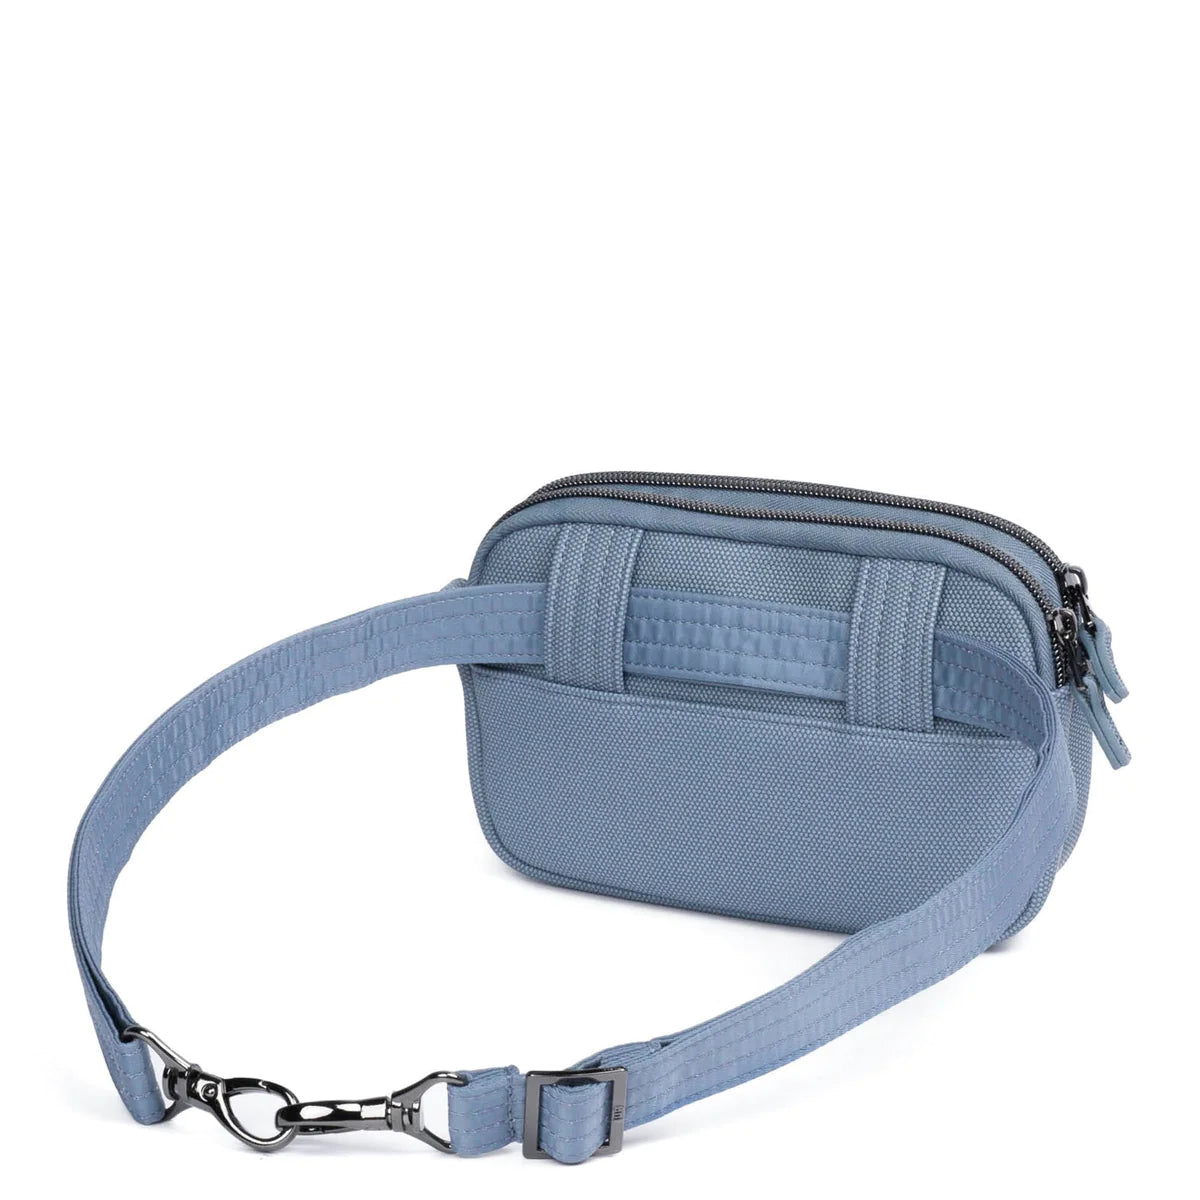 LUG Coupe Matte Luxe VL Convertible Crossbody Bag in Blue Moon